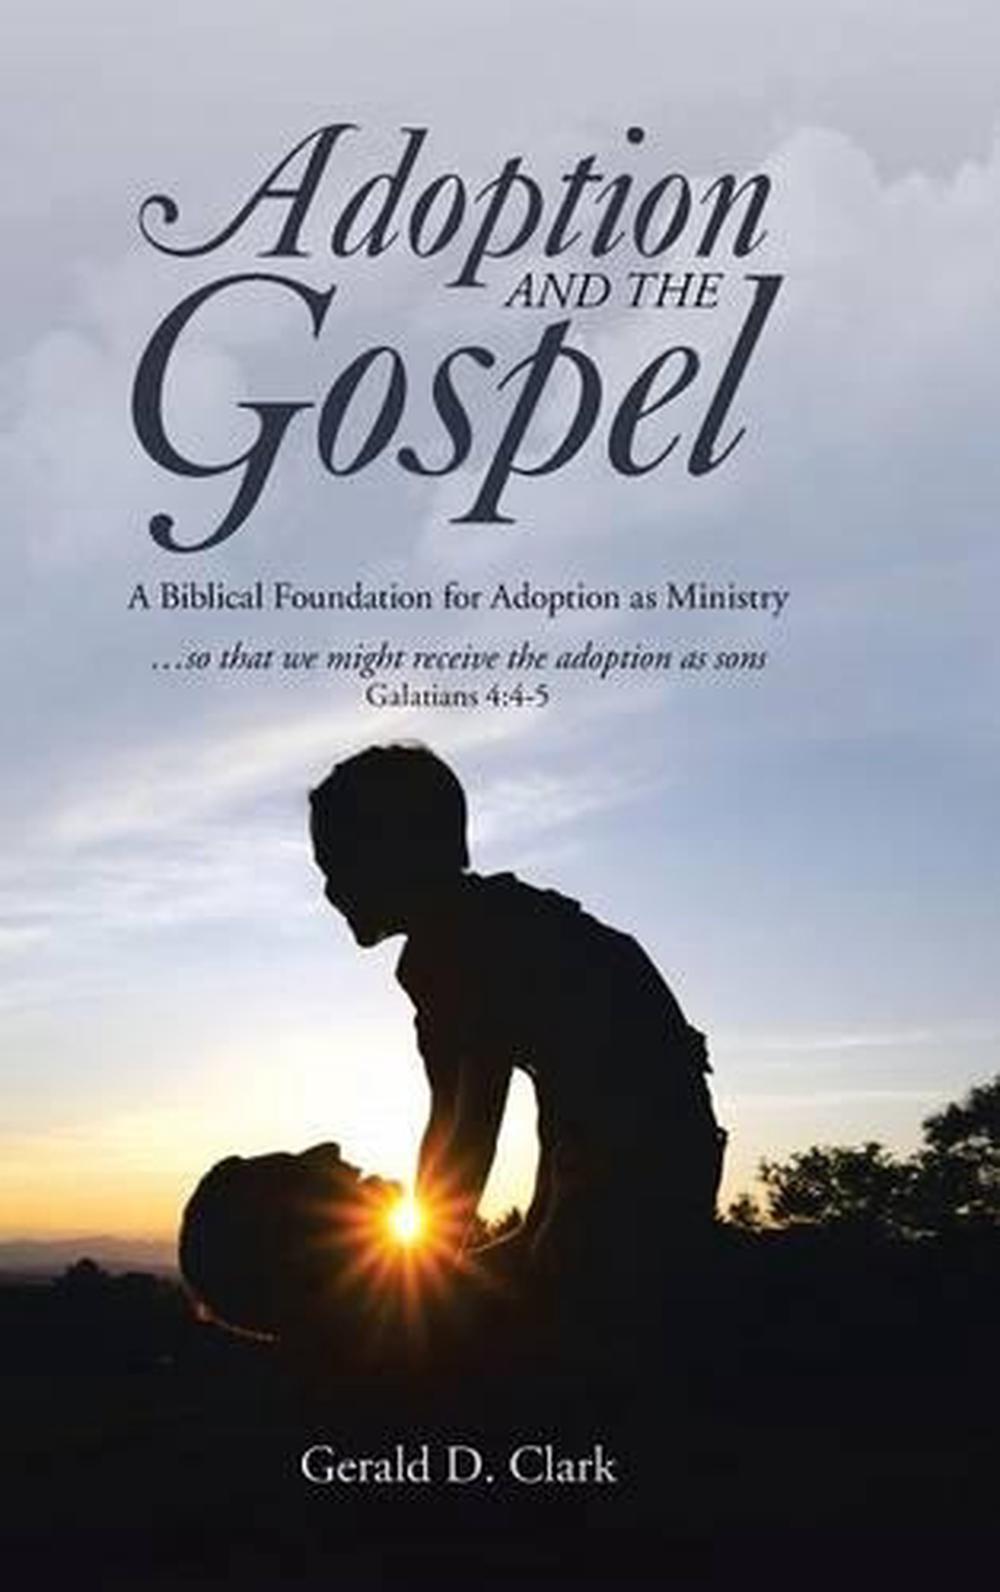 Adoption and the Gospel: A Biblical Foundation for Adoption as Ministry